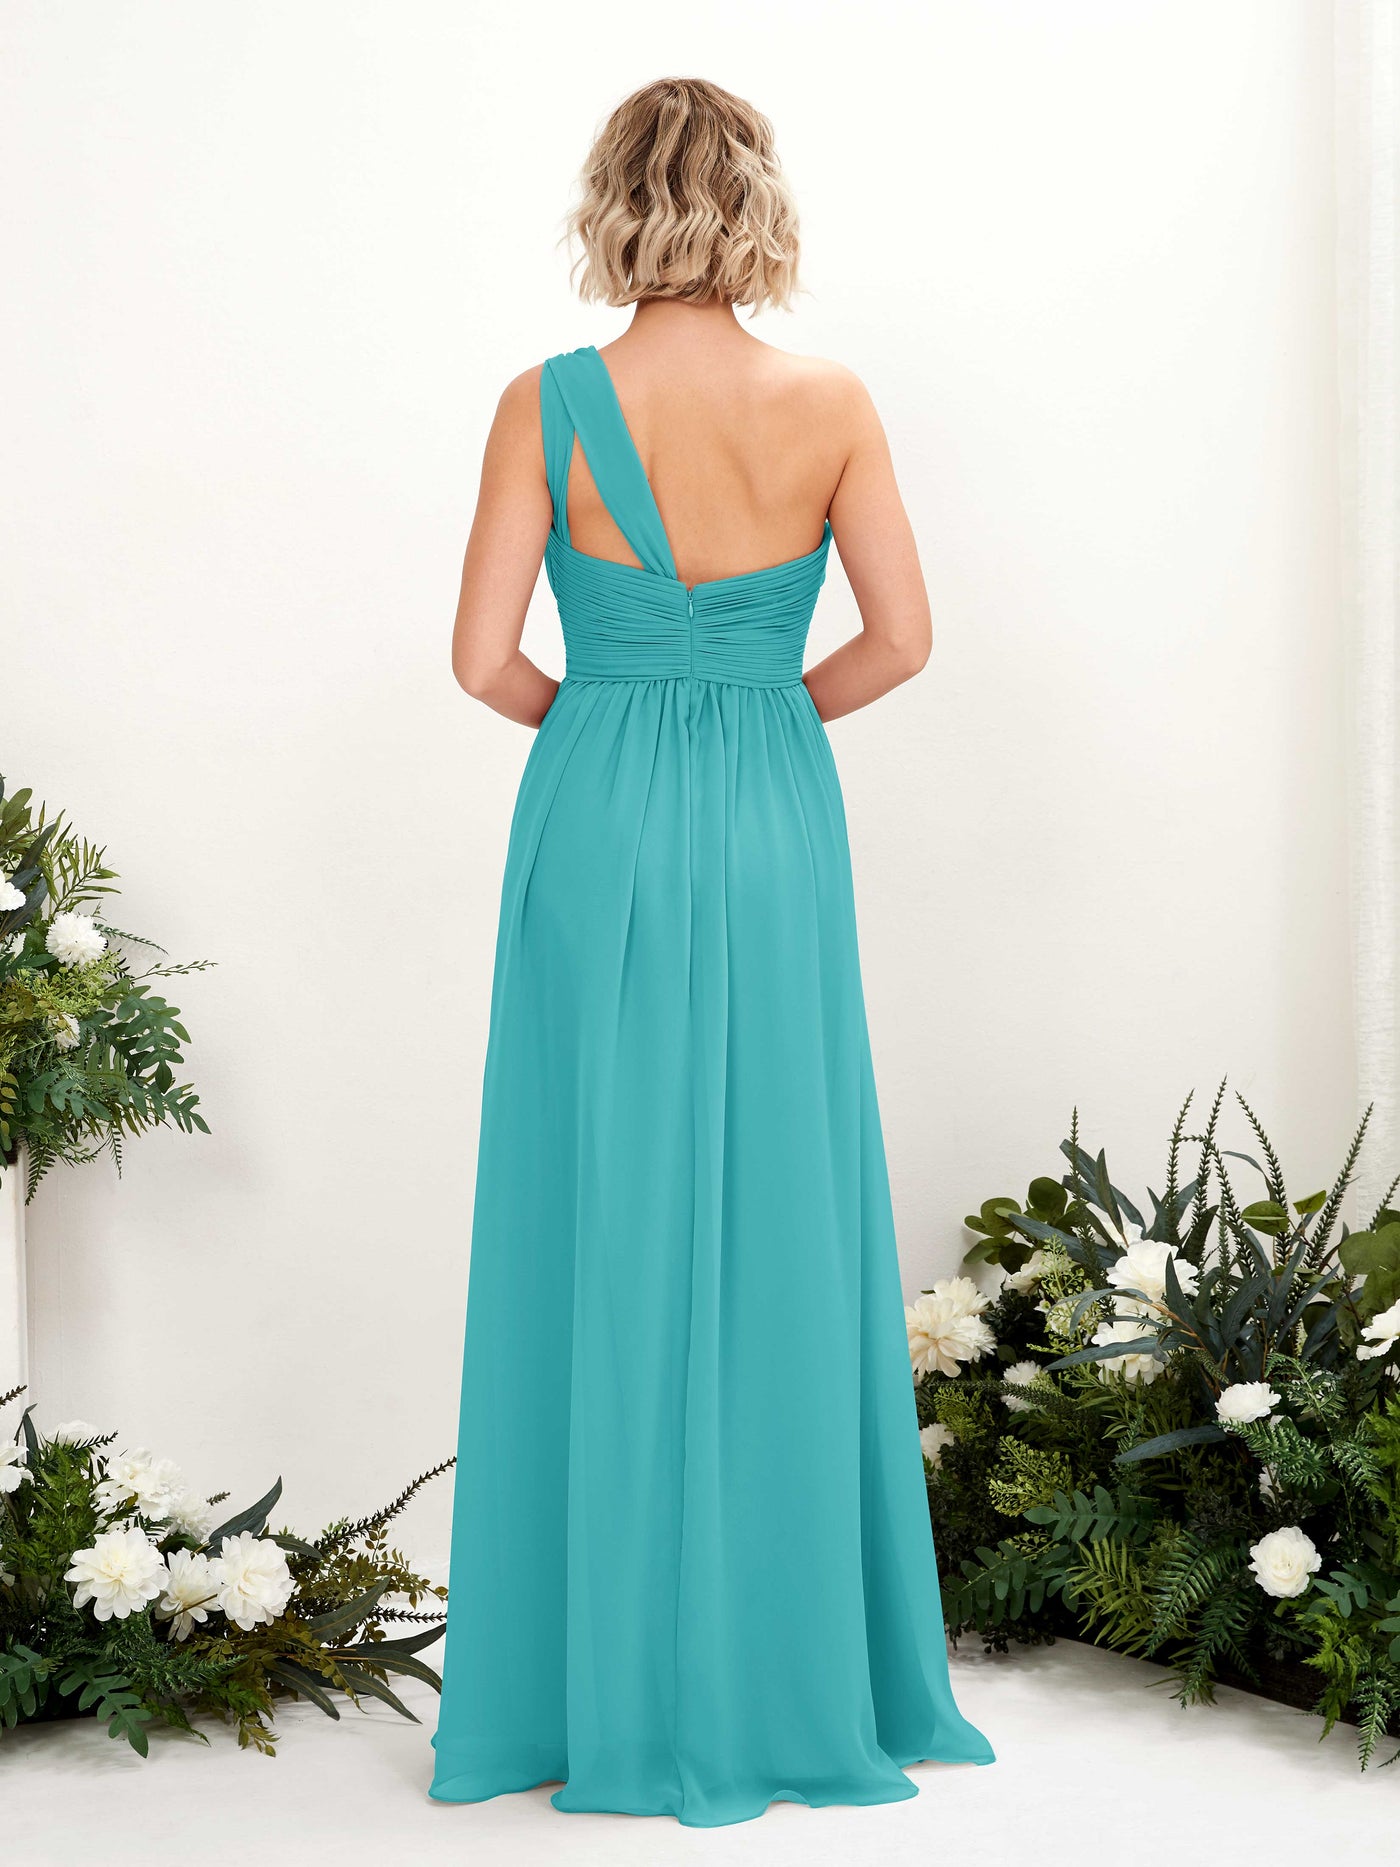 Turquoise Bridesmaid Dresses Bridesmaid Dress Ball Gown Chiffon One Shoulder Full Length Sleeveless Wedding Party Dress (81225023)#color_turquoise